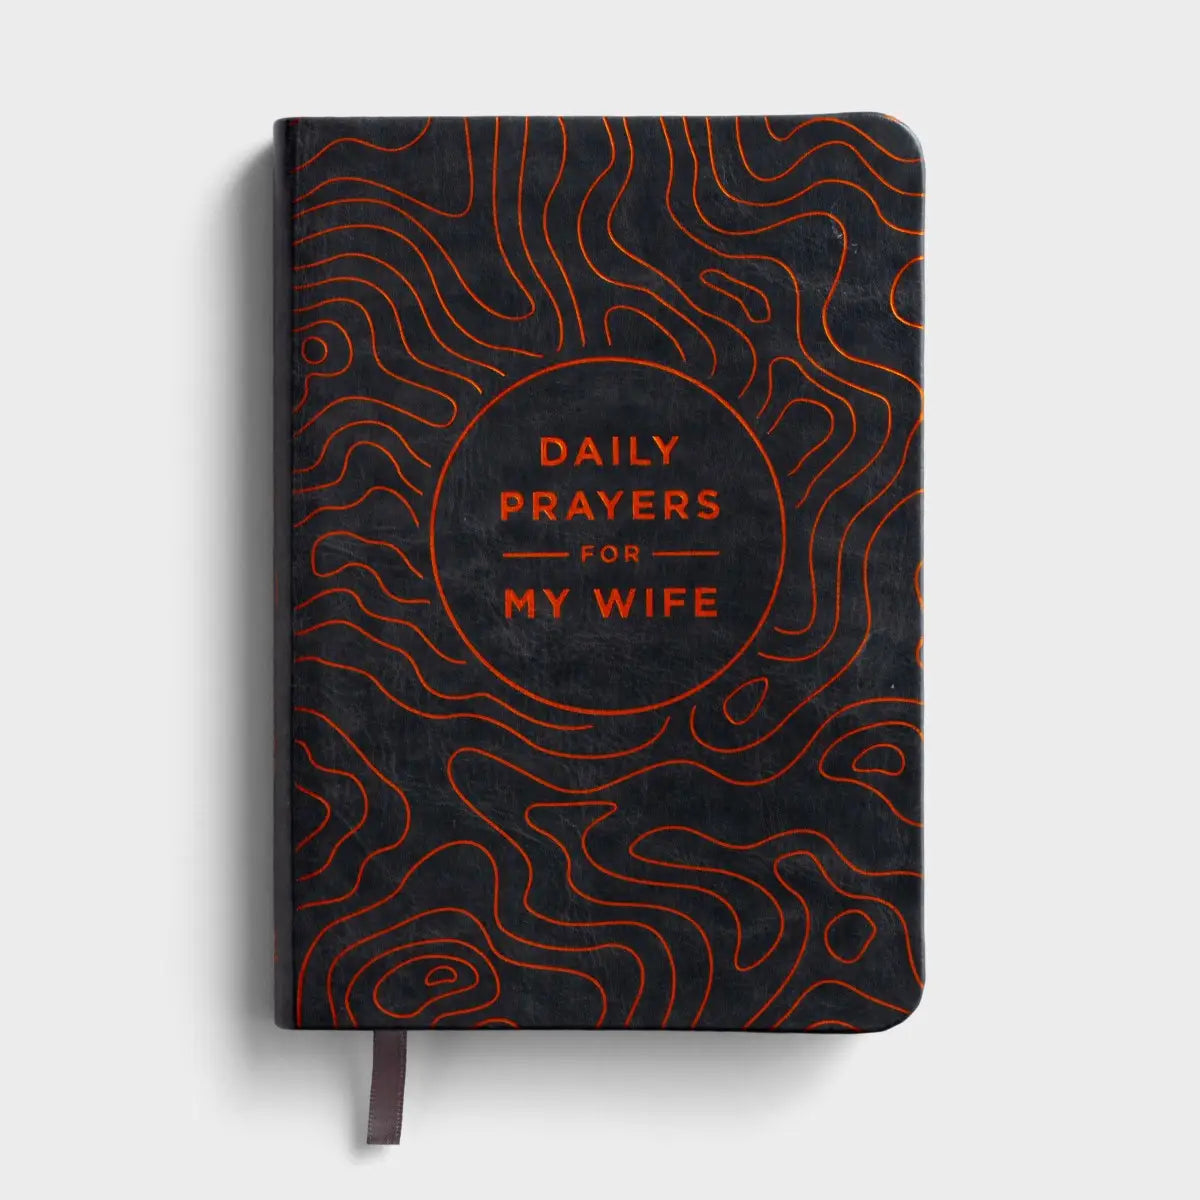 Daysprings Daily Prayers for My Wife - Devotional Book